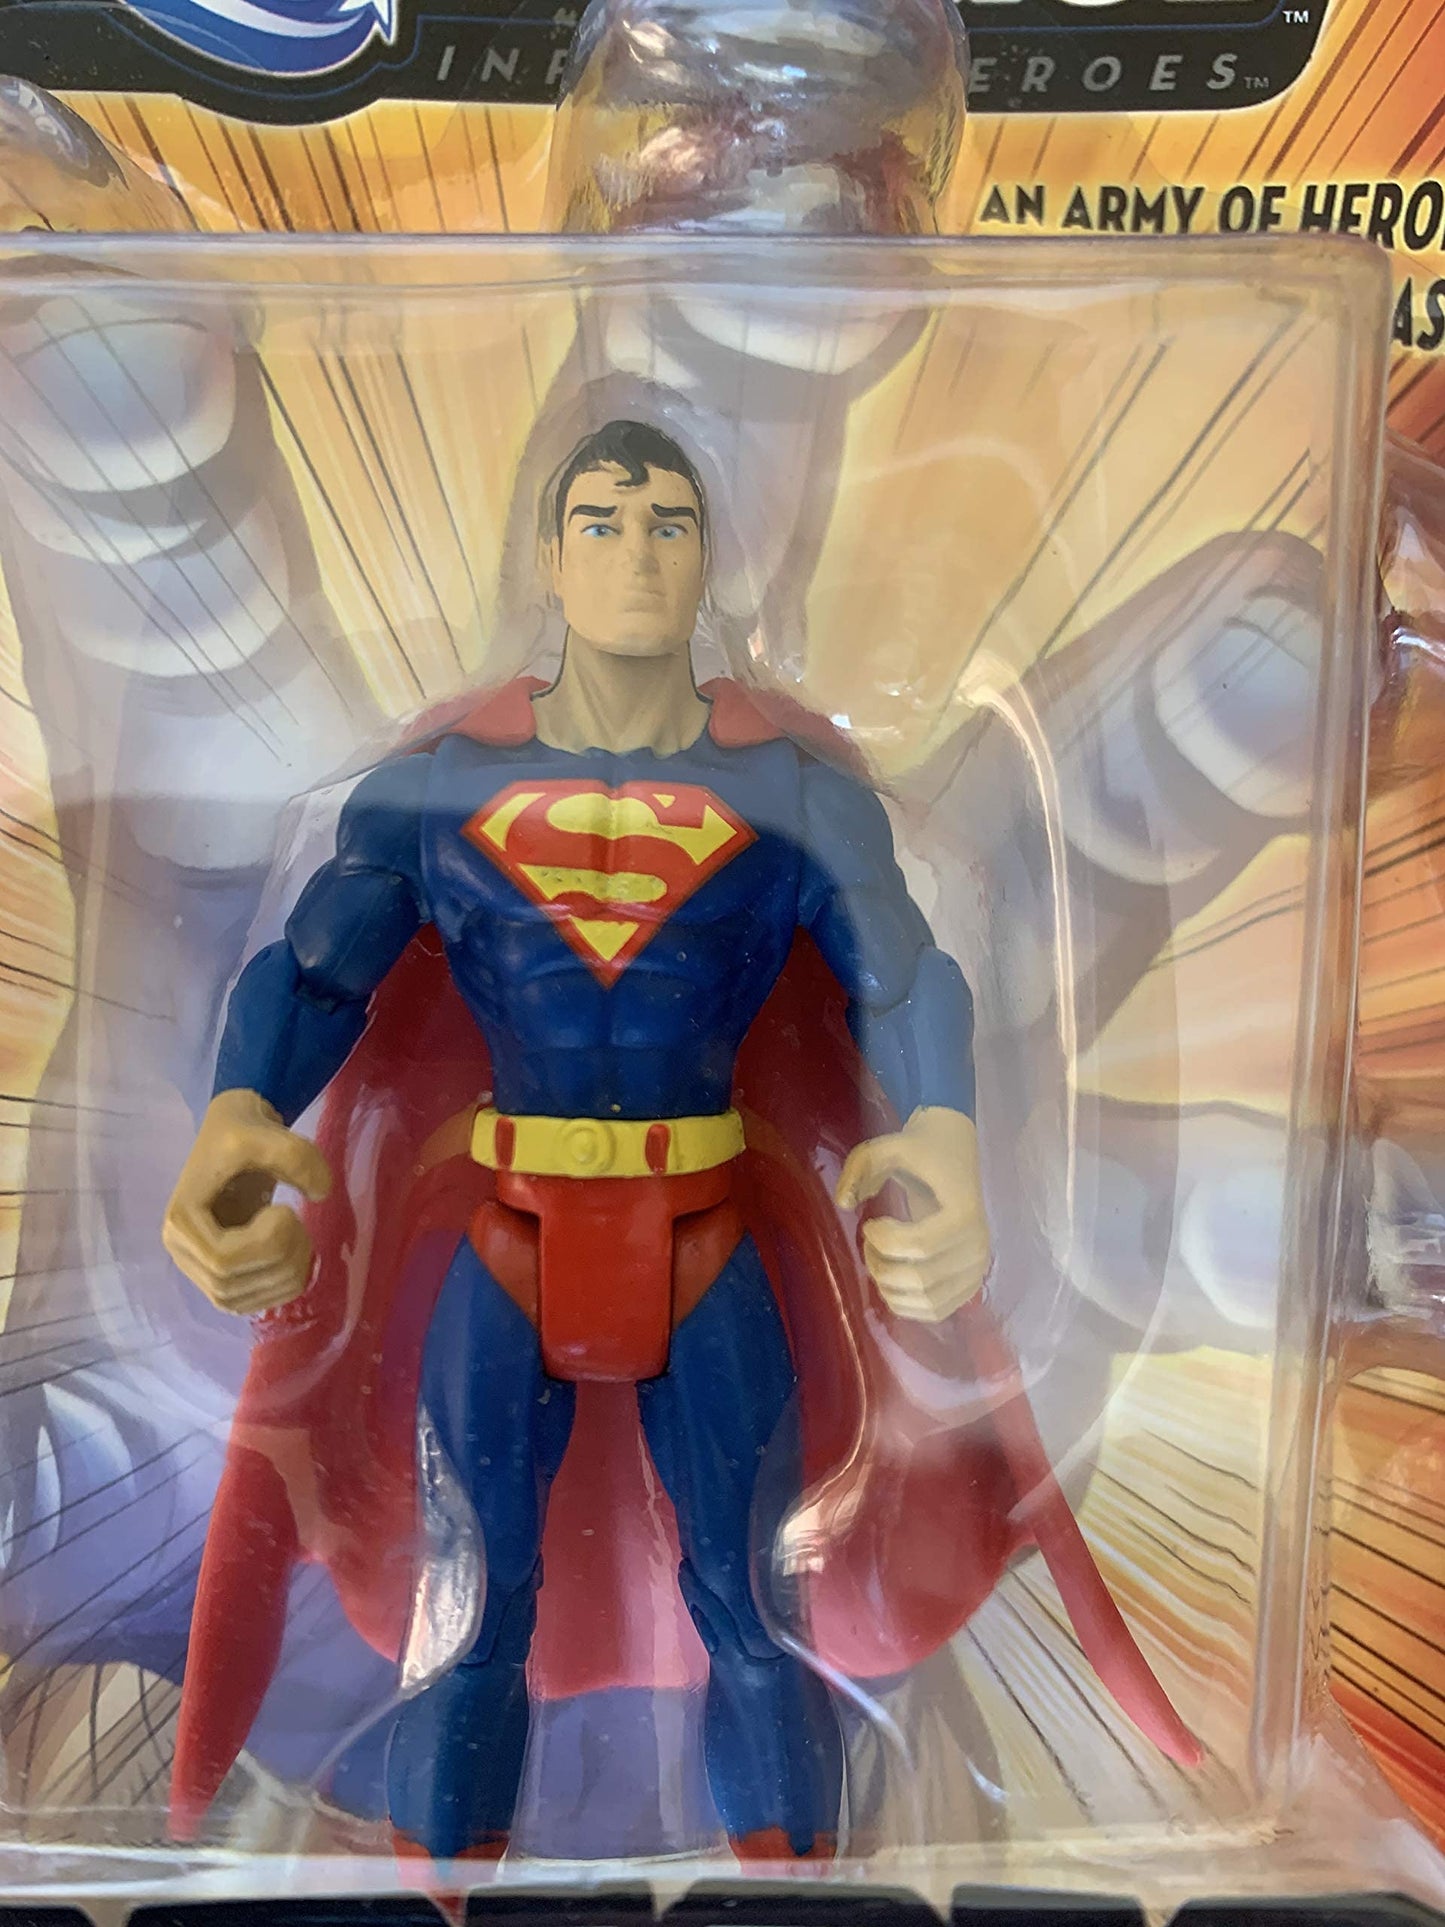 Vintage 2008 DC Universe Infinite Heroes Crisis Series 1 Figure Number 25 - Superman Action Figure - Brand New Factory Sealed Shop Stock Room Find